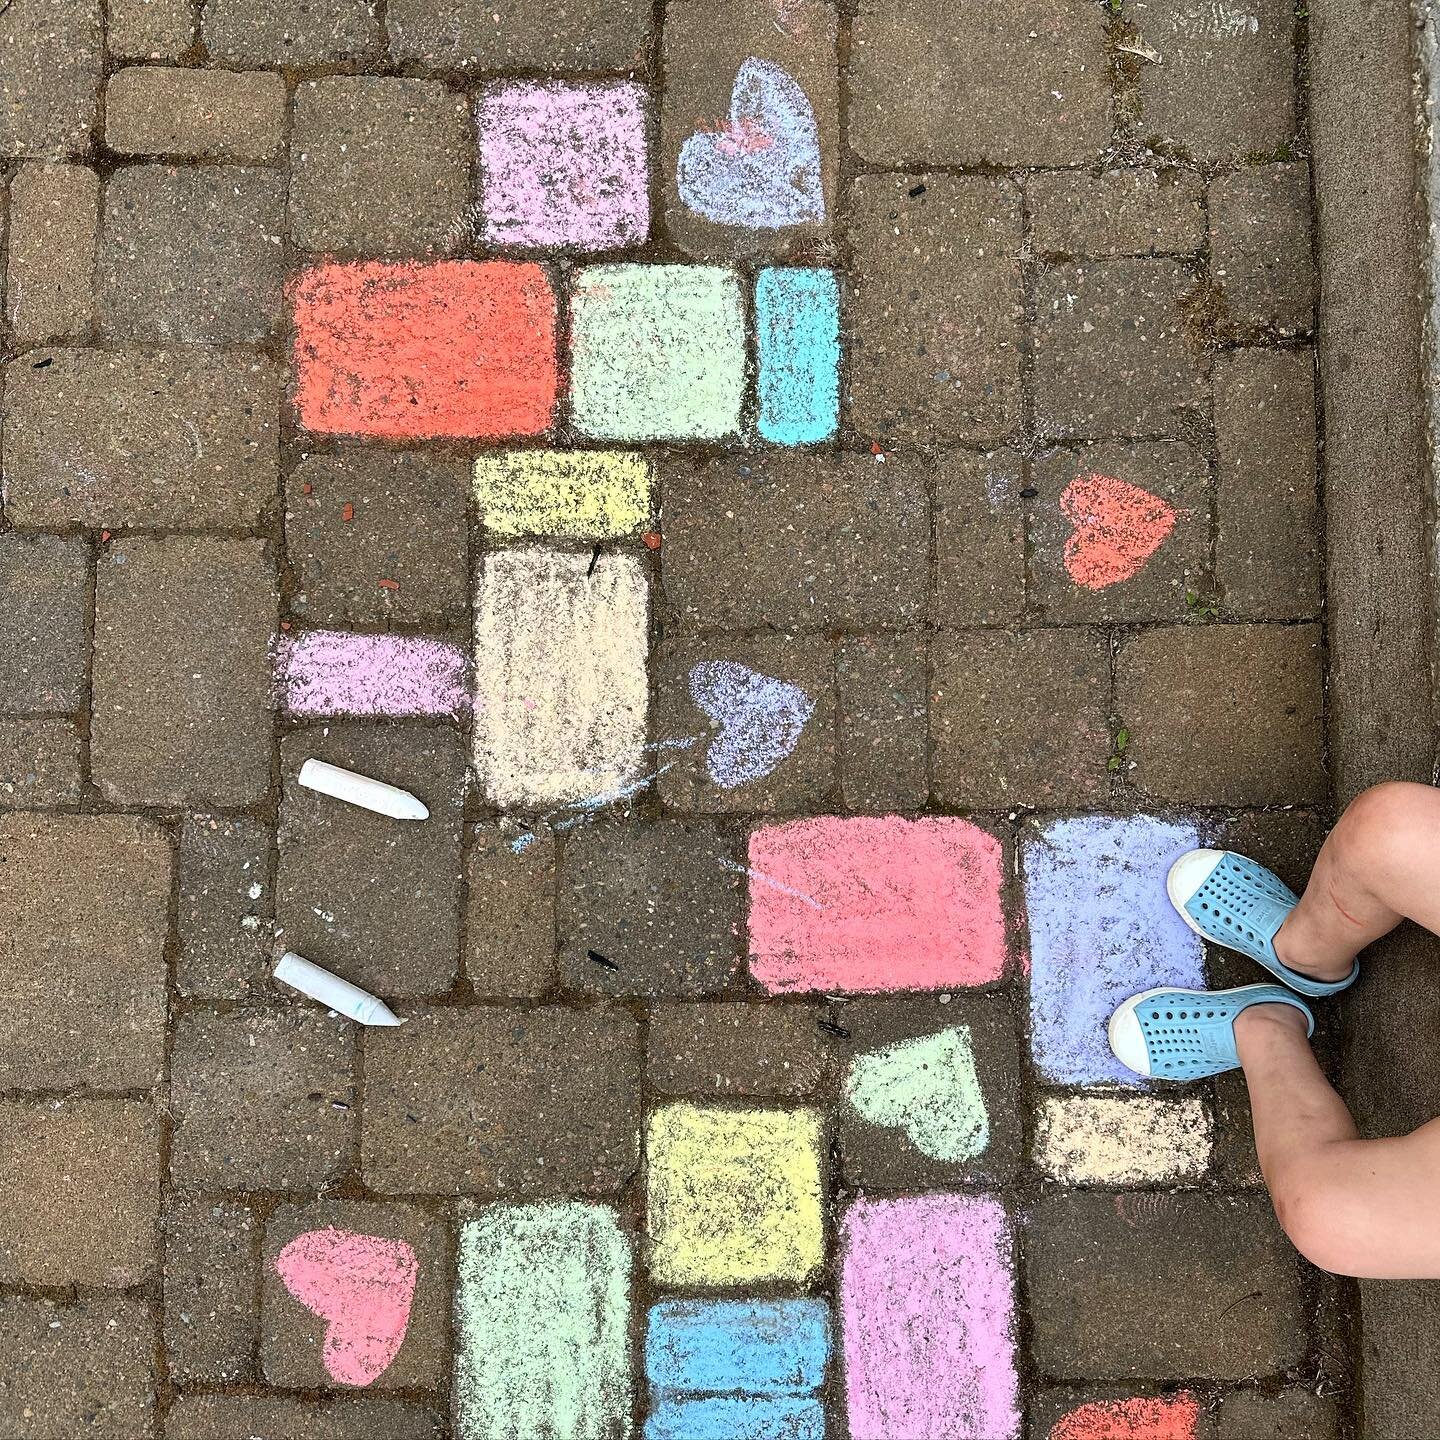 💜💛💚💙🧡❤️💗 
Take a second to notice something beautiful around you today. 

#littlefeet #chalk #chalkart #kidart #kidartists #sidewalkchalkart #sidewalkchalkart #rainbow #happycolors